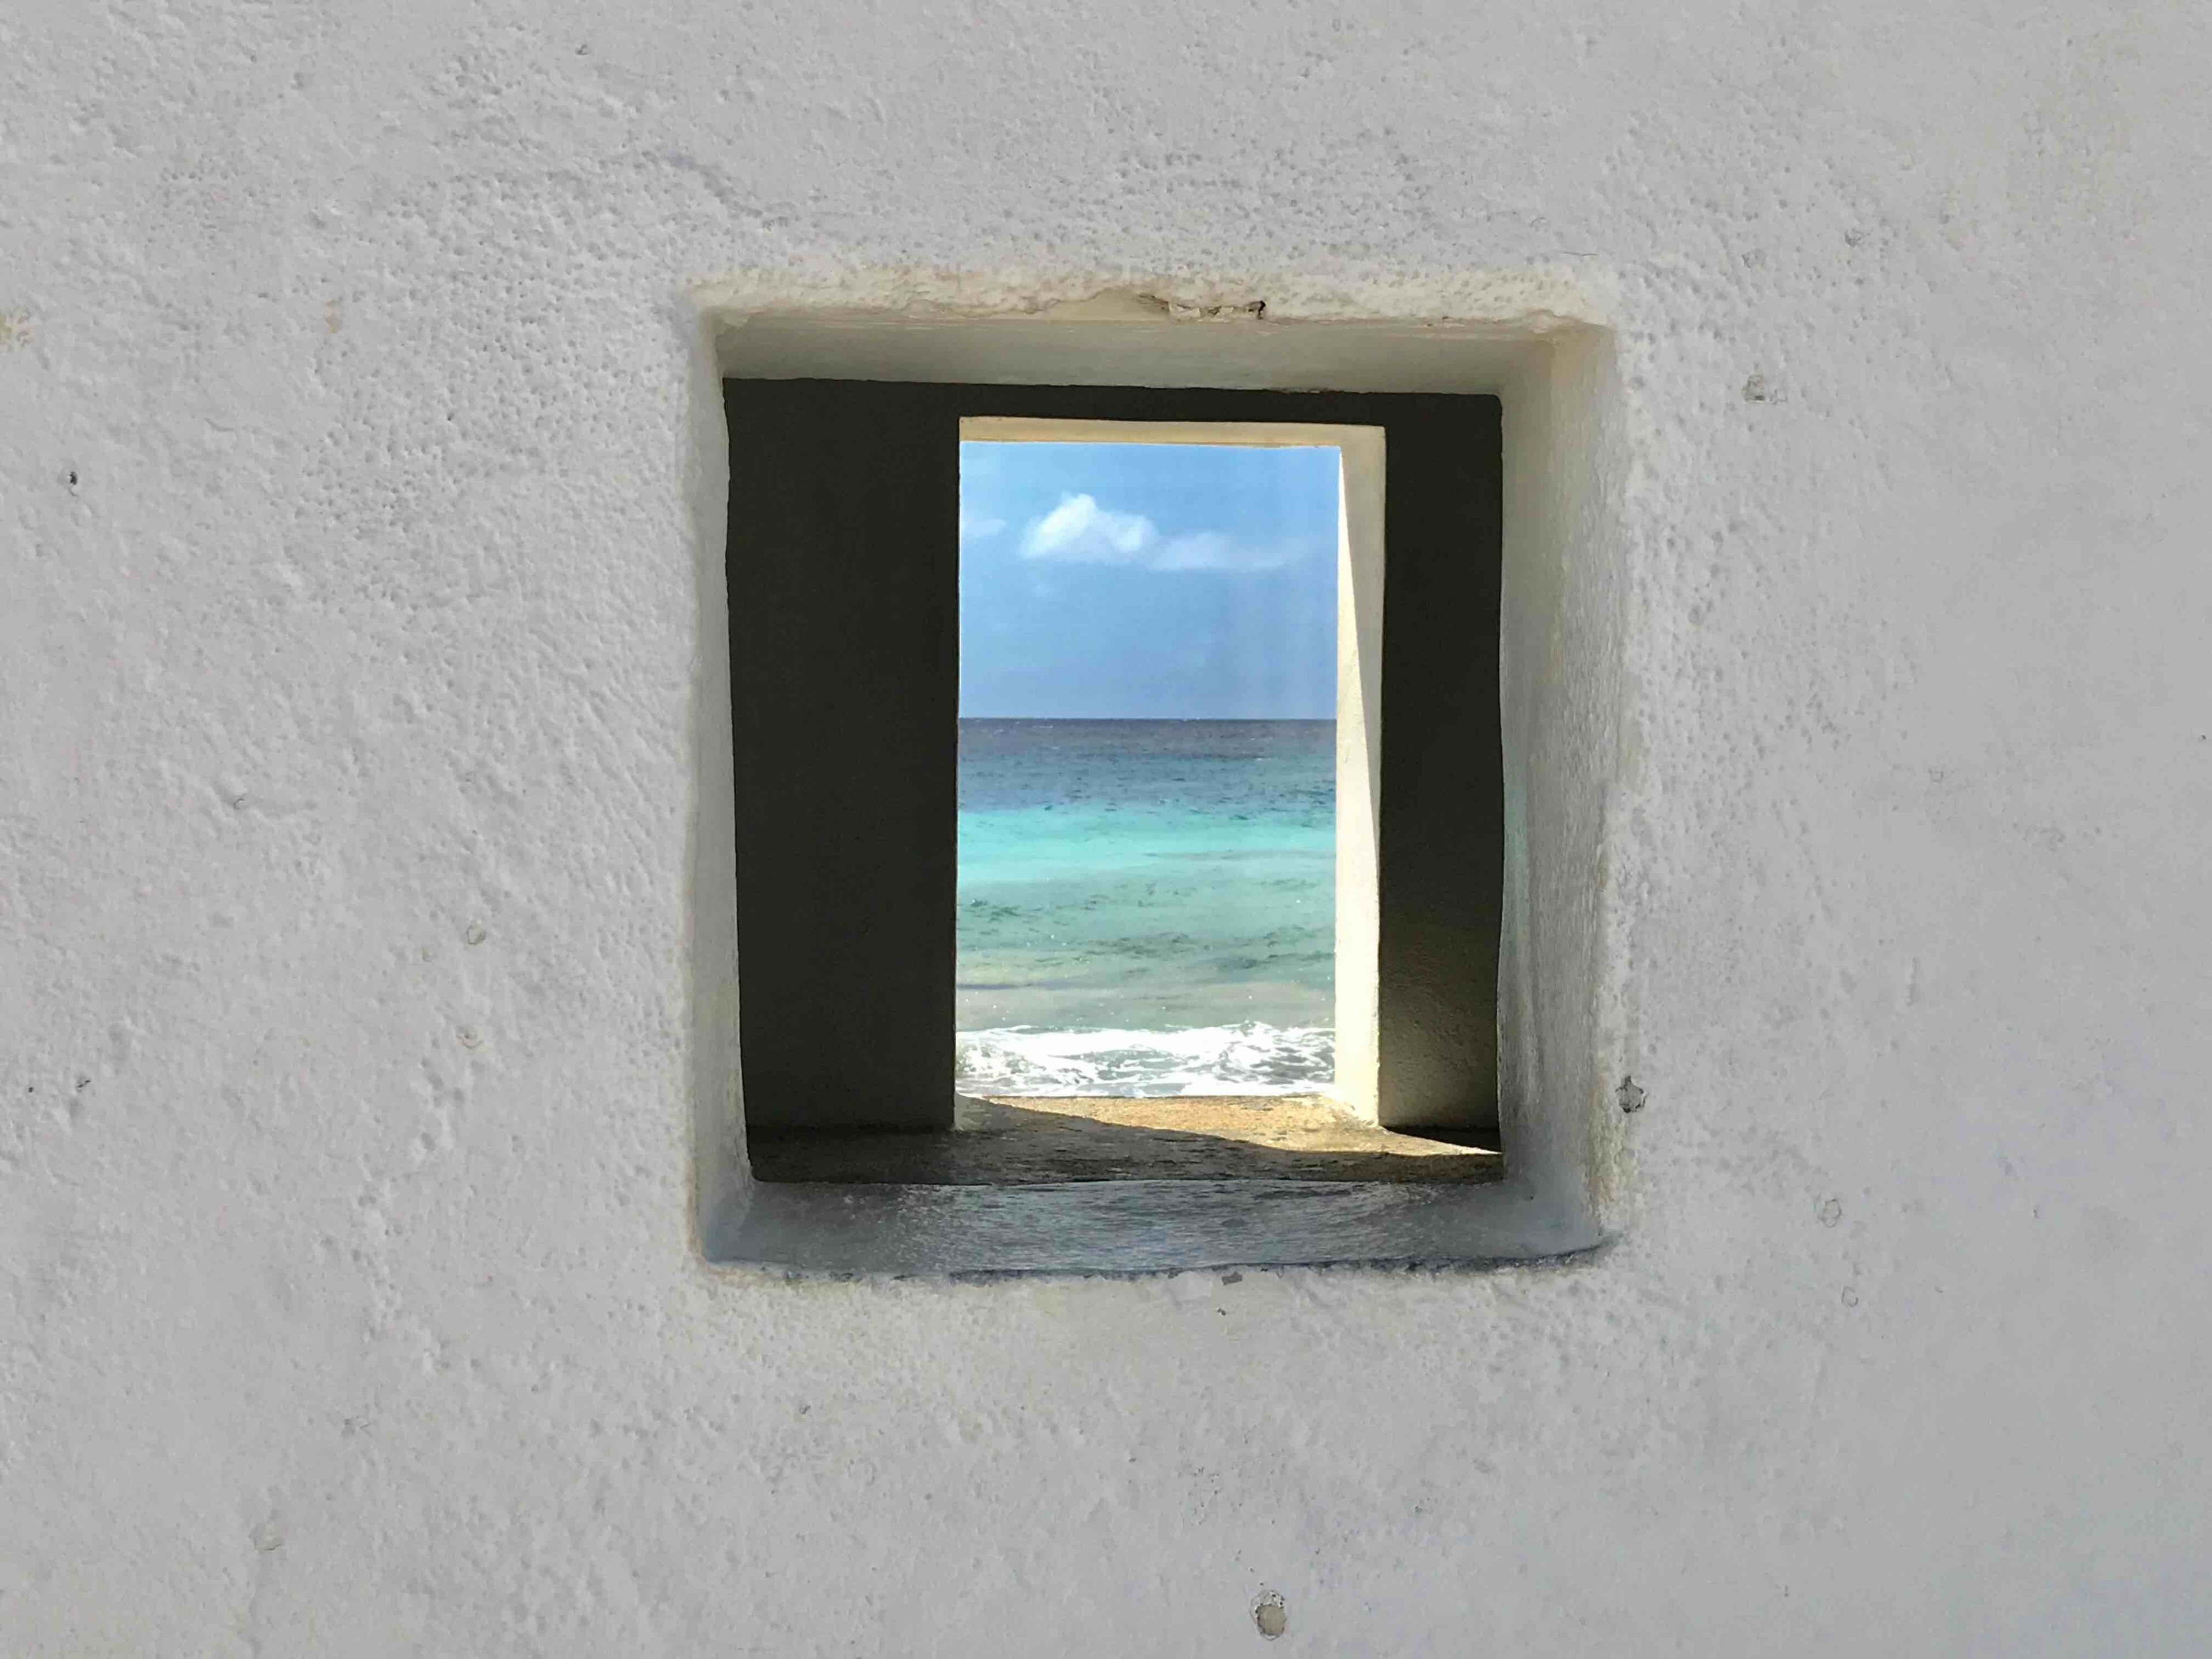 Having a look through one of the slave huts in southern Bonaire 🇧🇶 
#Perspectives #Bonaire #SlaveHuts